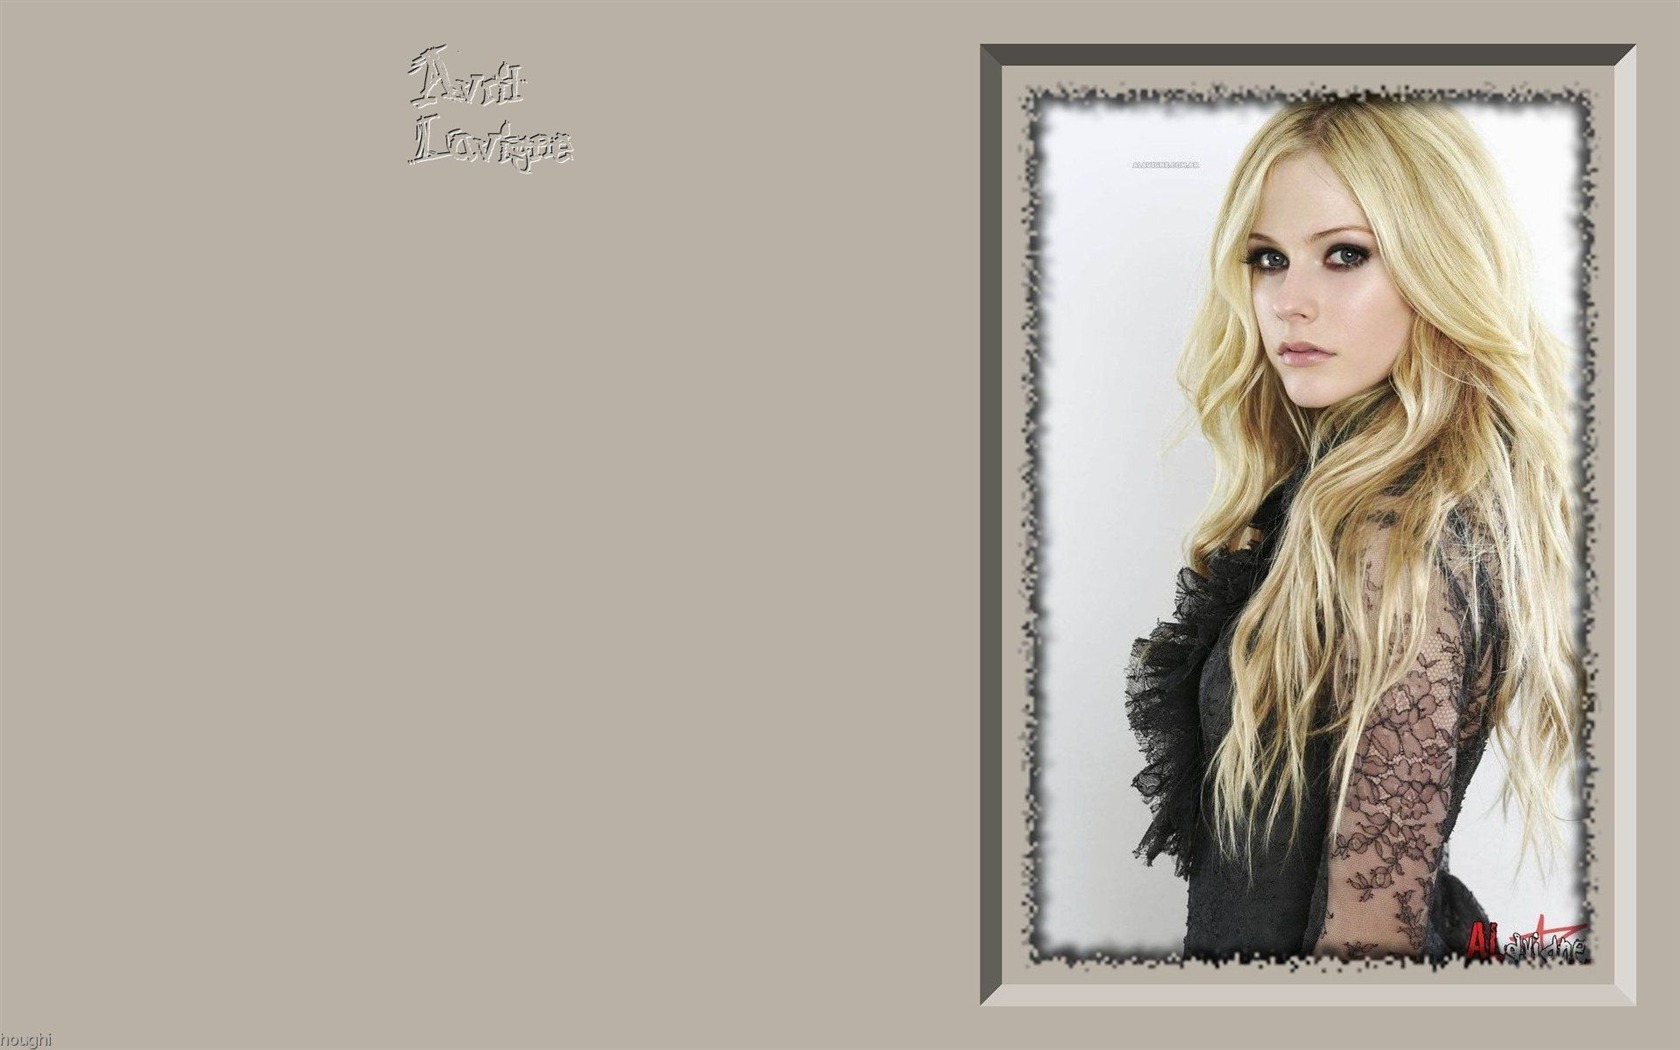 Avril Lavigne #066 - 1680x1050 Wallpapers Pictures Photos Images